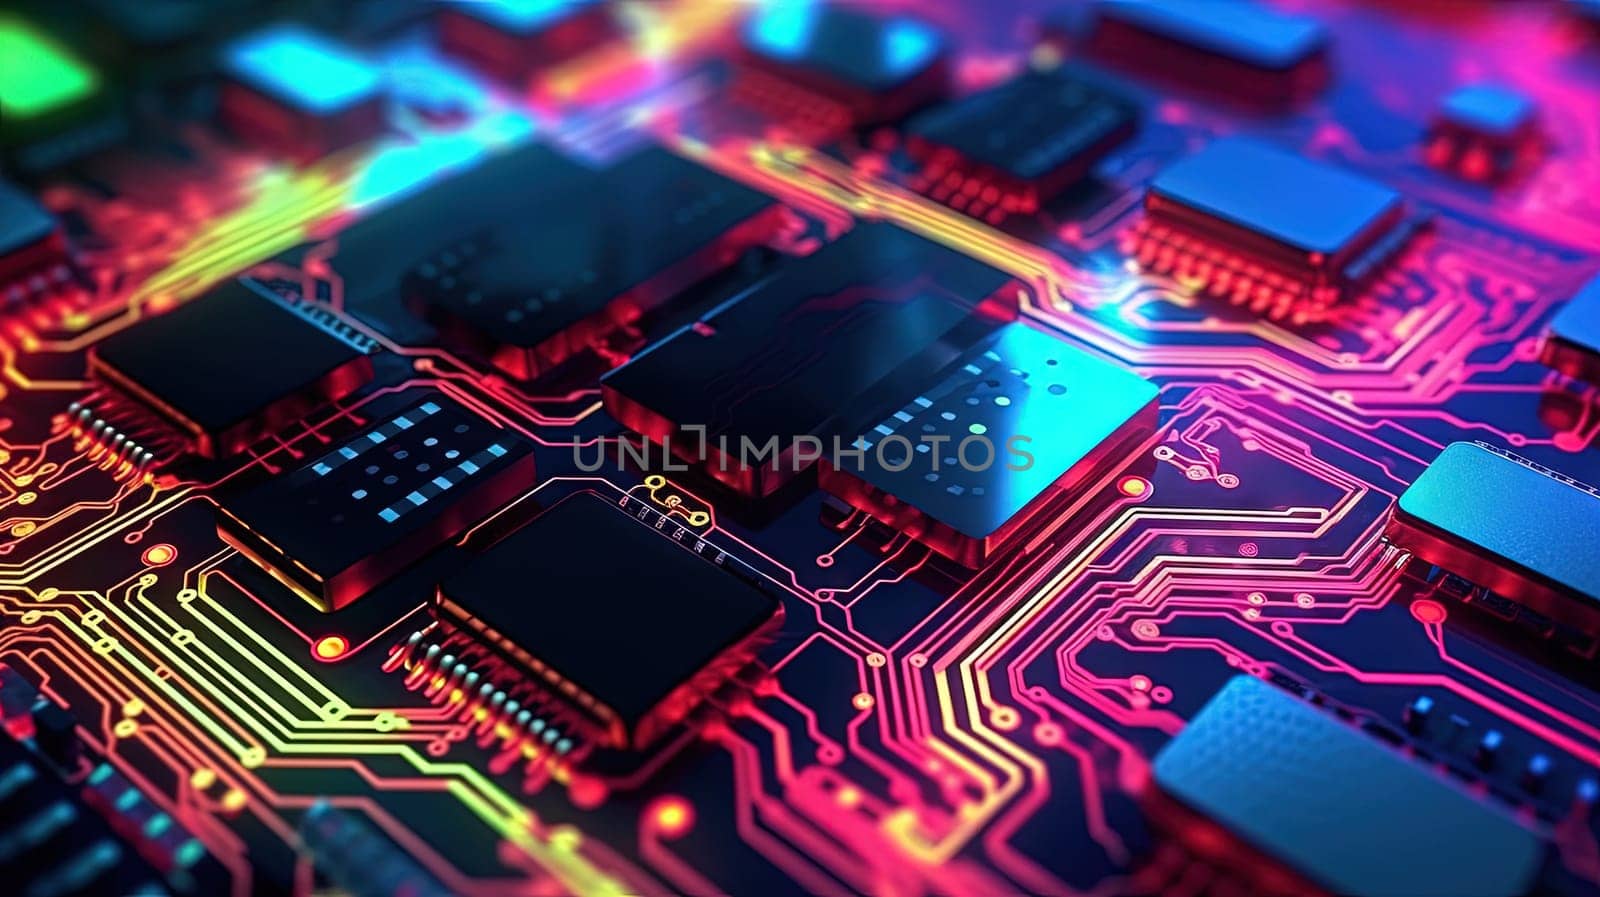 Motherboard with chips and connections in purple and blue neon lights. Technology background with microchips on hardware circuitboard. Generated AI